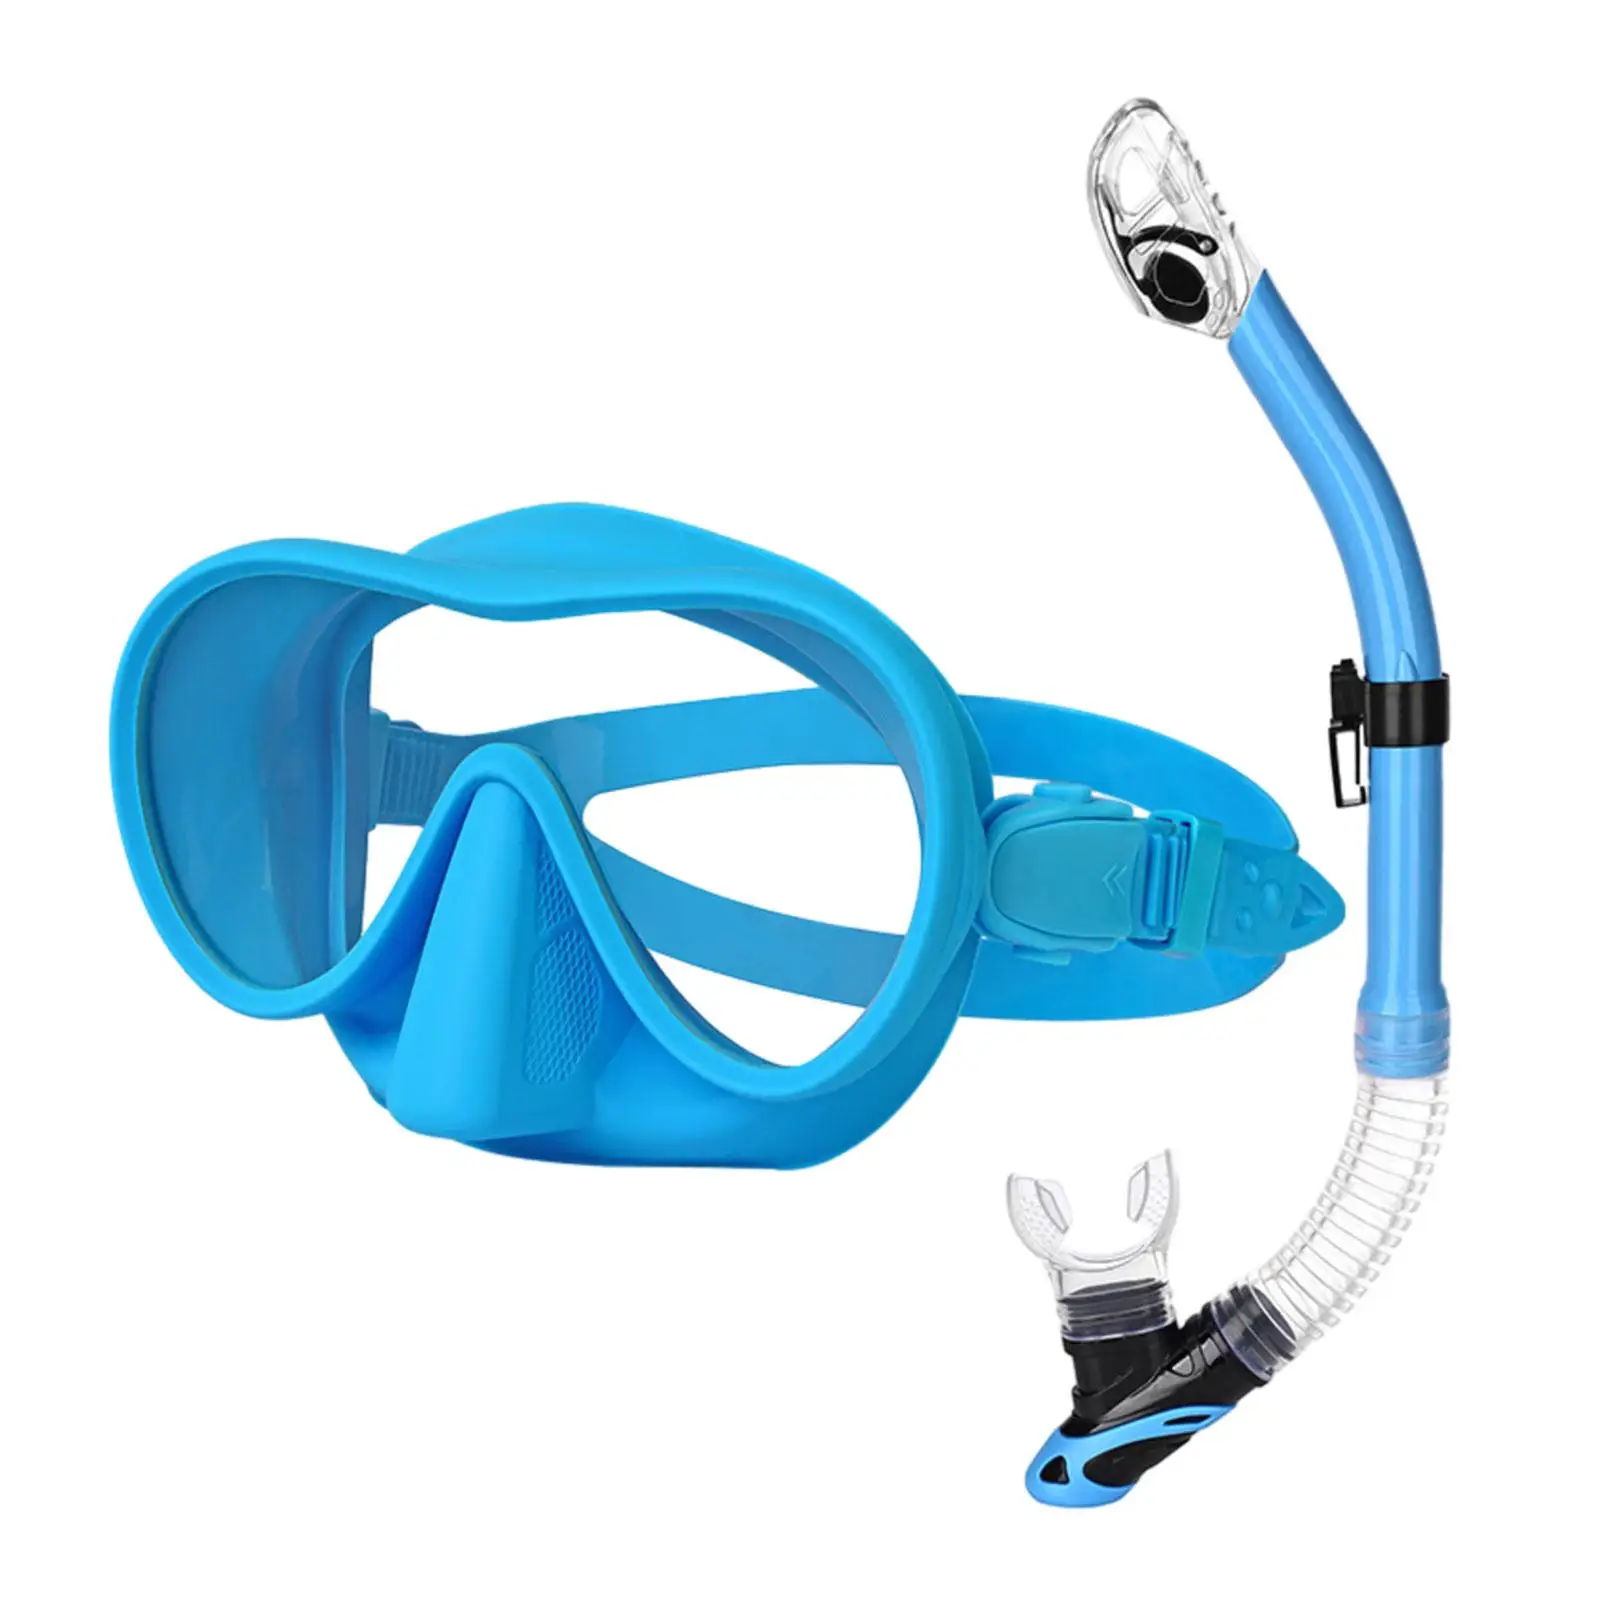 Snorkel Set Swim Goggles, Breathing Snorkel Mask, Adult Wide View Diving Mask Goggles for Scuba Diving